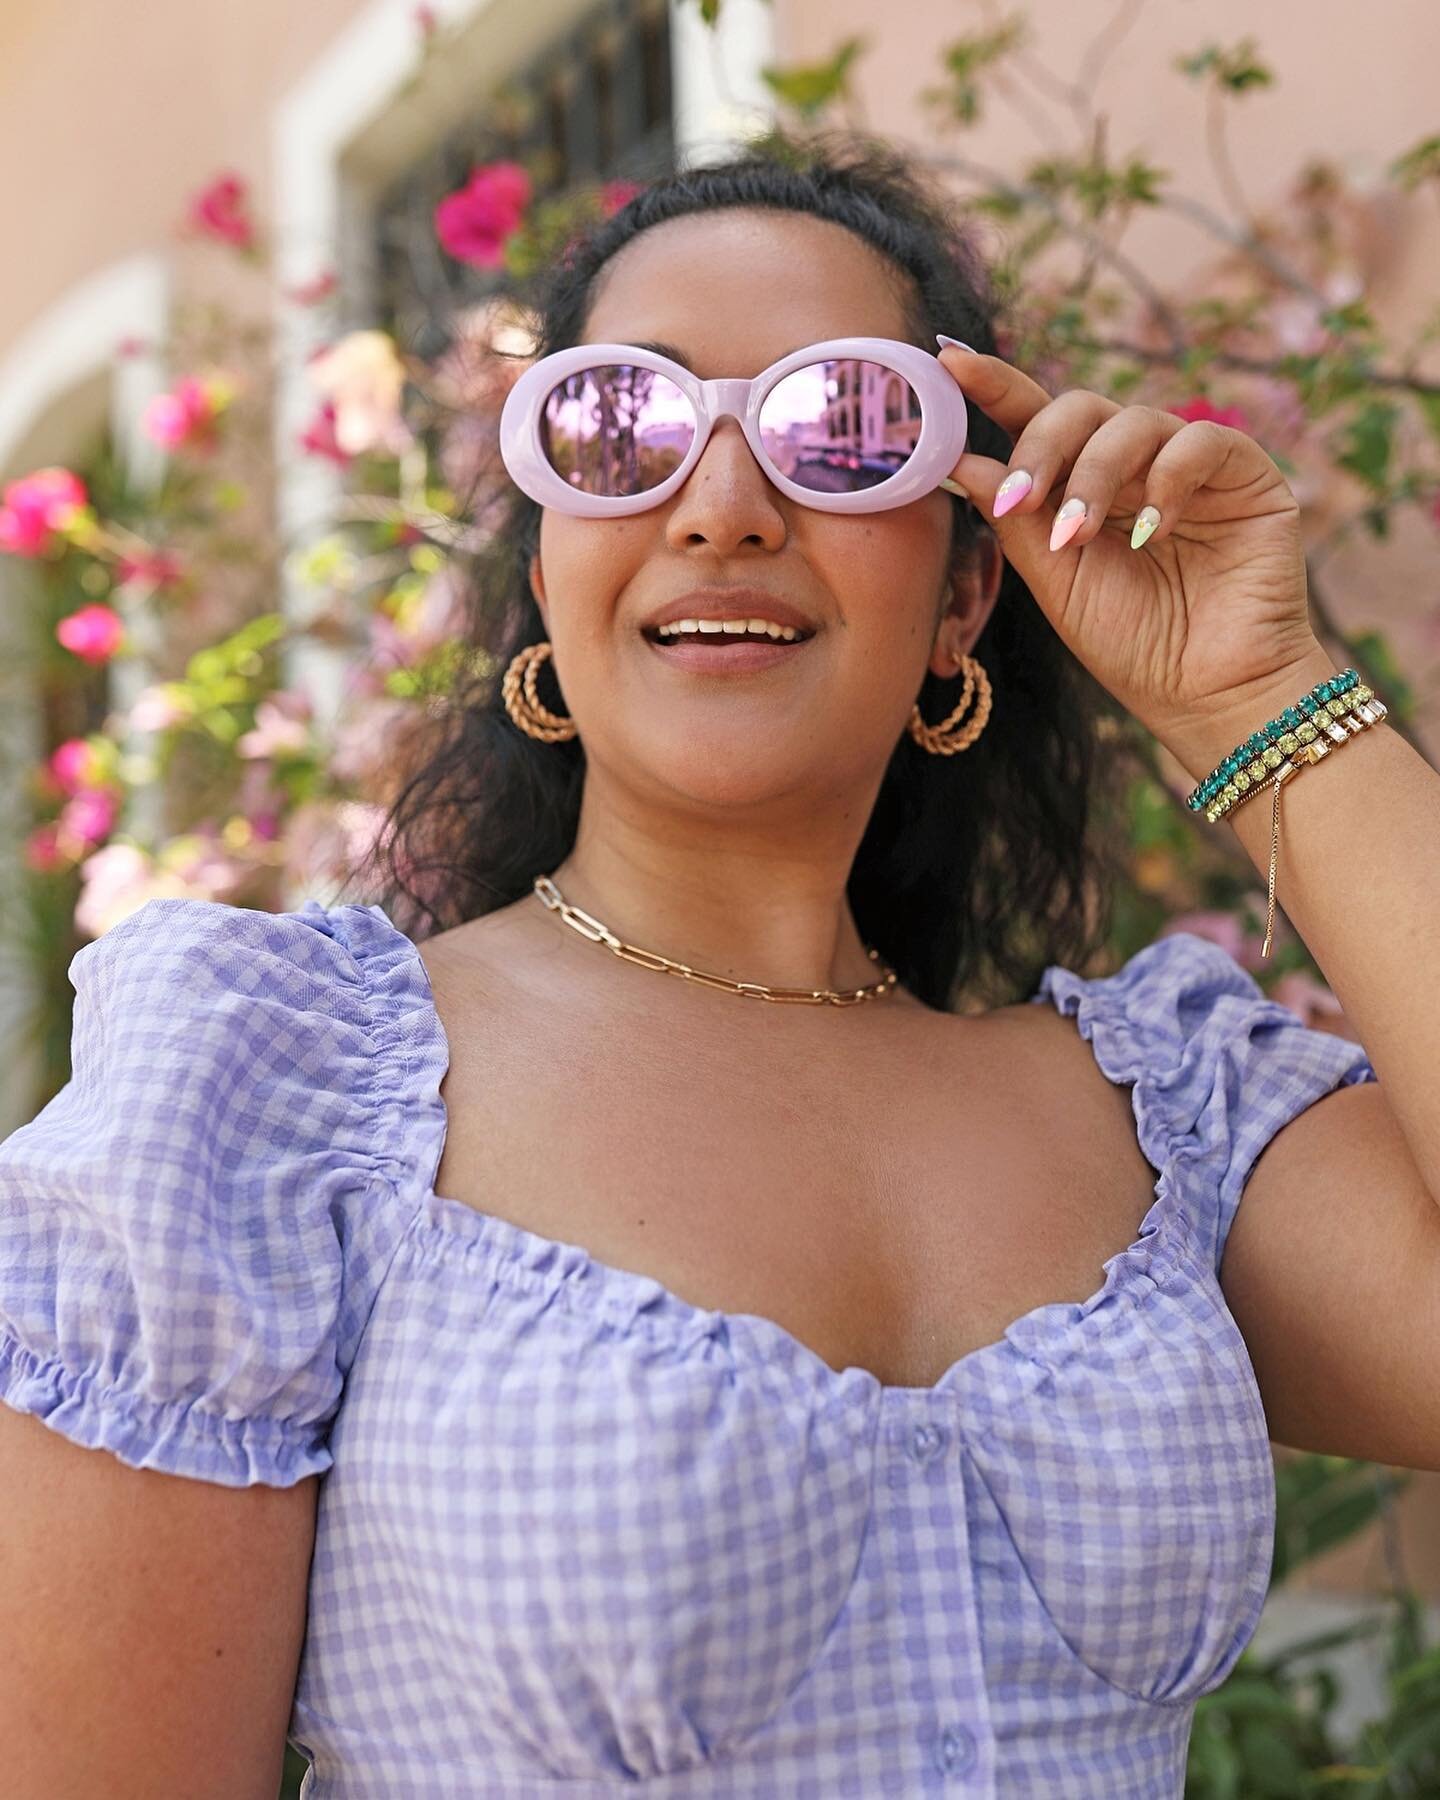 The future is looking g🕶d through my lavender tinted glasses! Drop a comment and tell me what you&rsquo;re excited about!⁠
#KrityS #KritySKloset ⁠
📸 @ashleygalleraniphotography